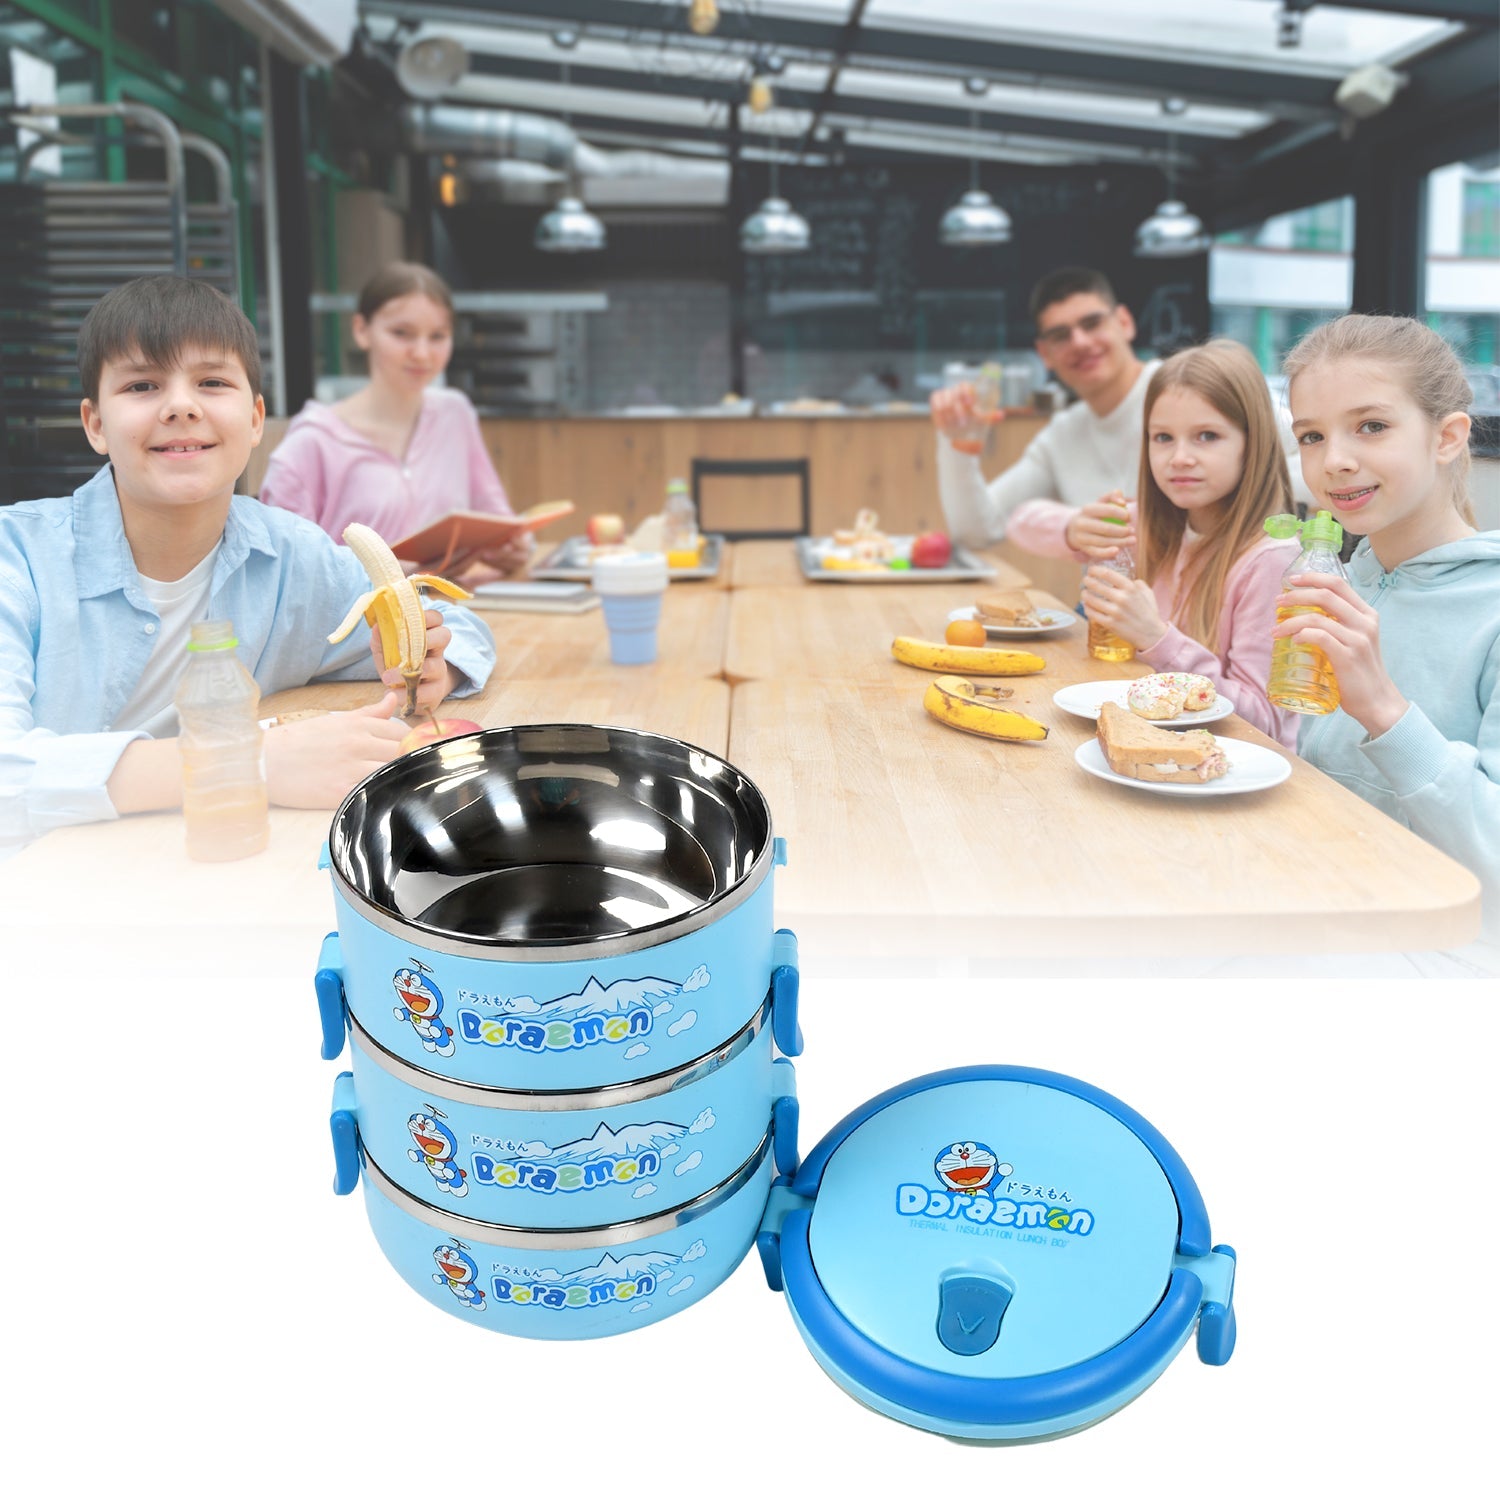 2872A 3 Layer Doraemon Lunch Box Tiffin High Quality Steel Lunch Box  3 Layer Tiffin For School ,Office & Traveling Use DeoDap